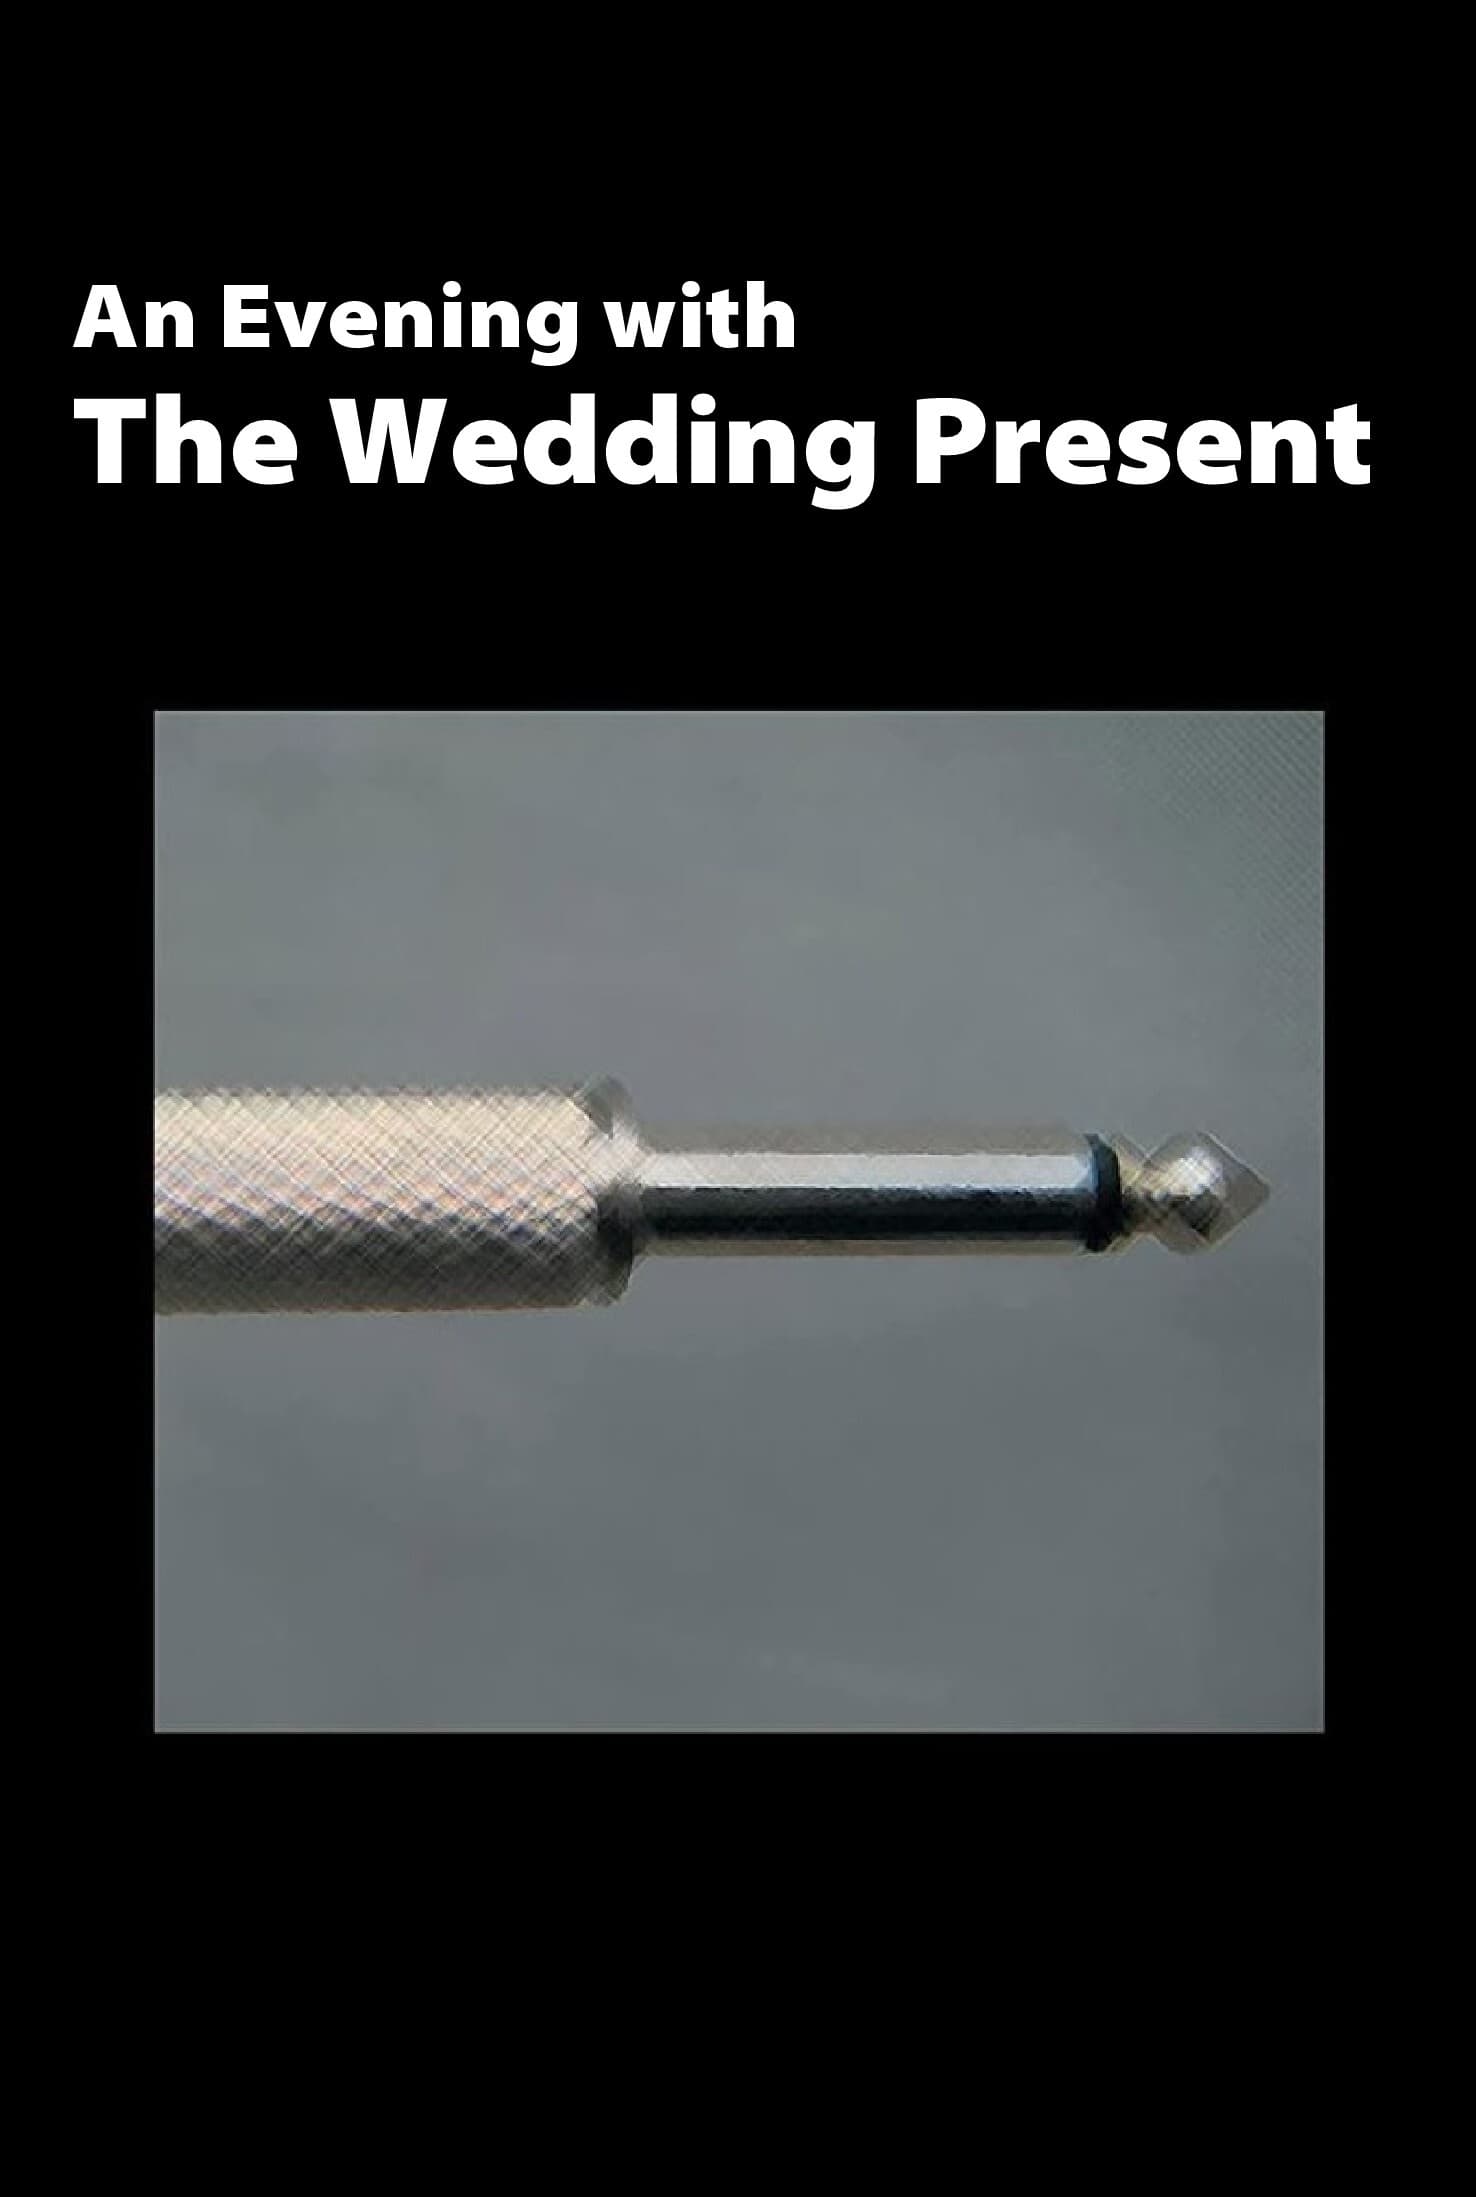 The Wedding Present: An Evening With The Wedding Present